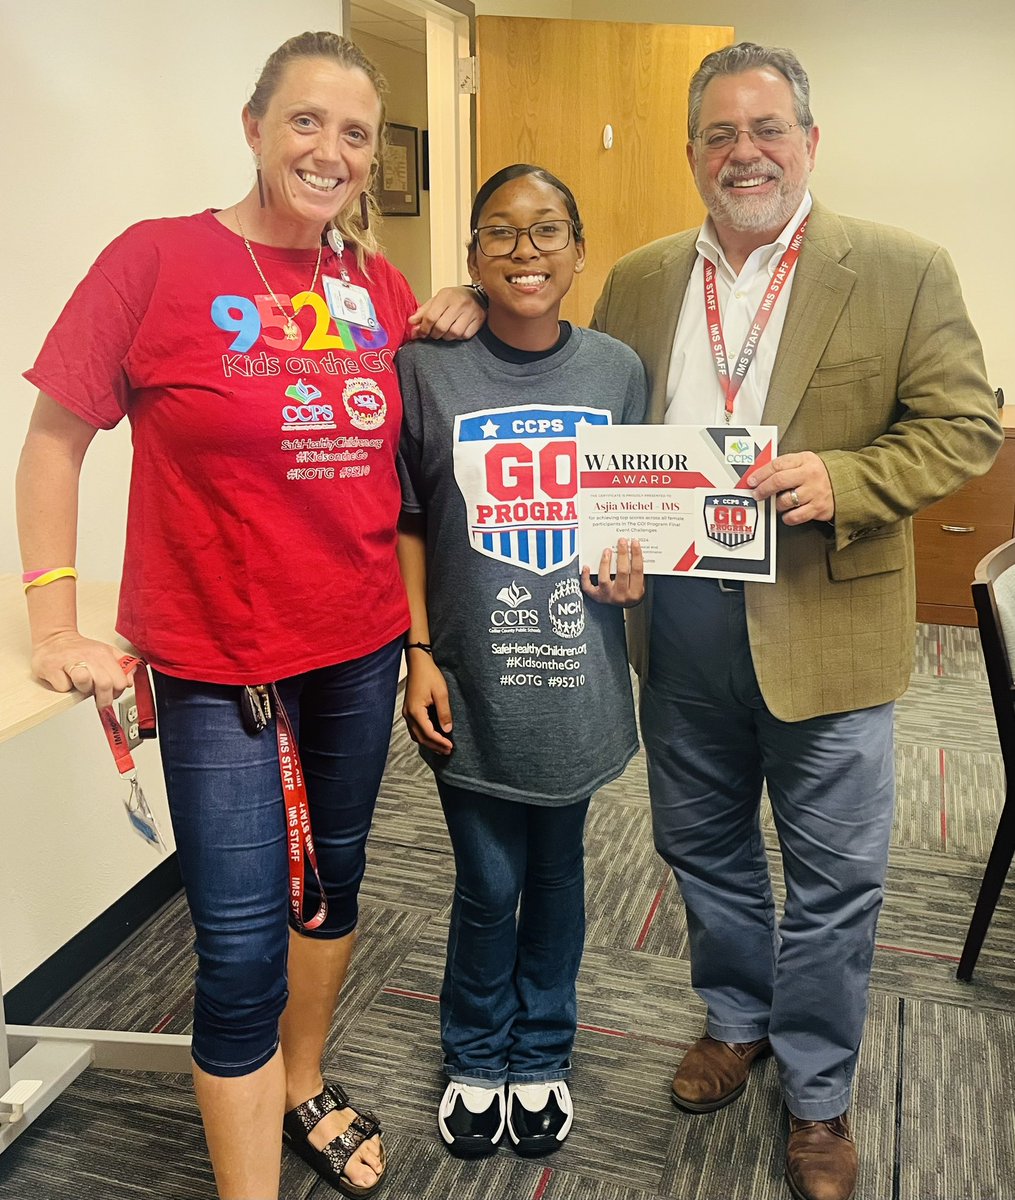 Congratulations to Asjia Michel, the very first female CCPS Warrior of the GO Program! she achieved top scores across all female participants of all middle schools in the Final Event Challenges! Way to GO, Asjia! @IMS_Indians #goprogram #athlete #excellence #CCPSProud #KOTG